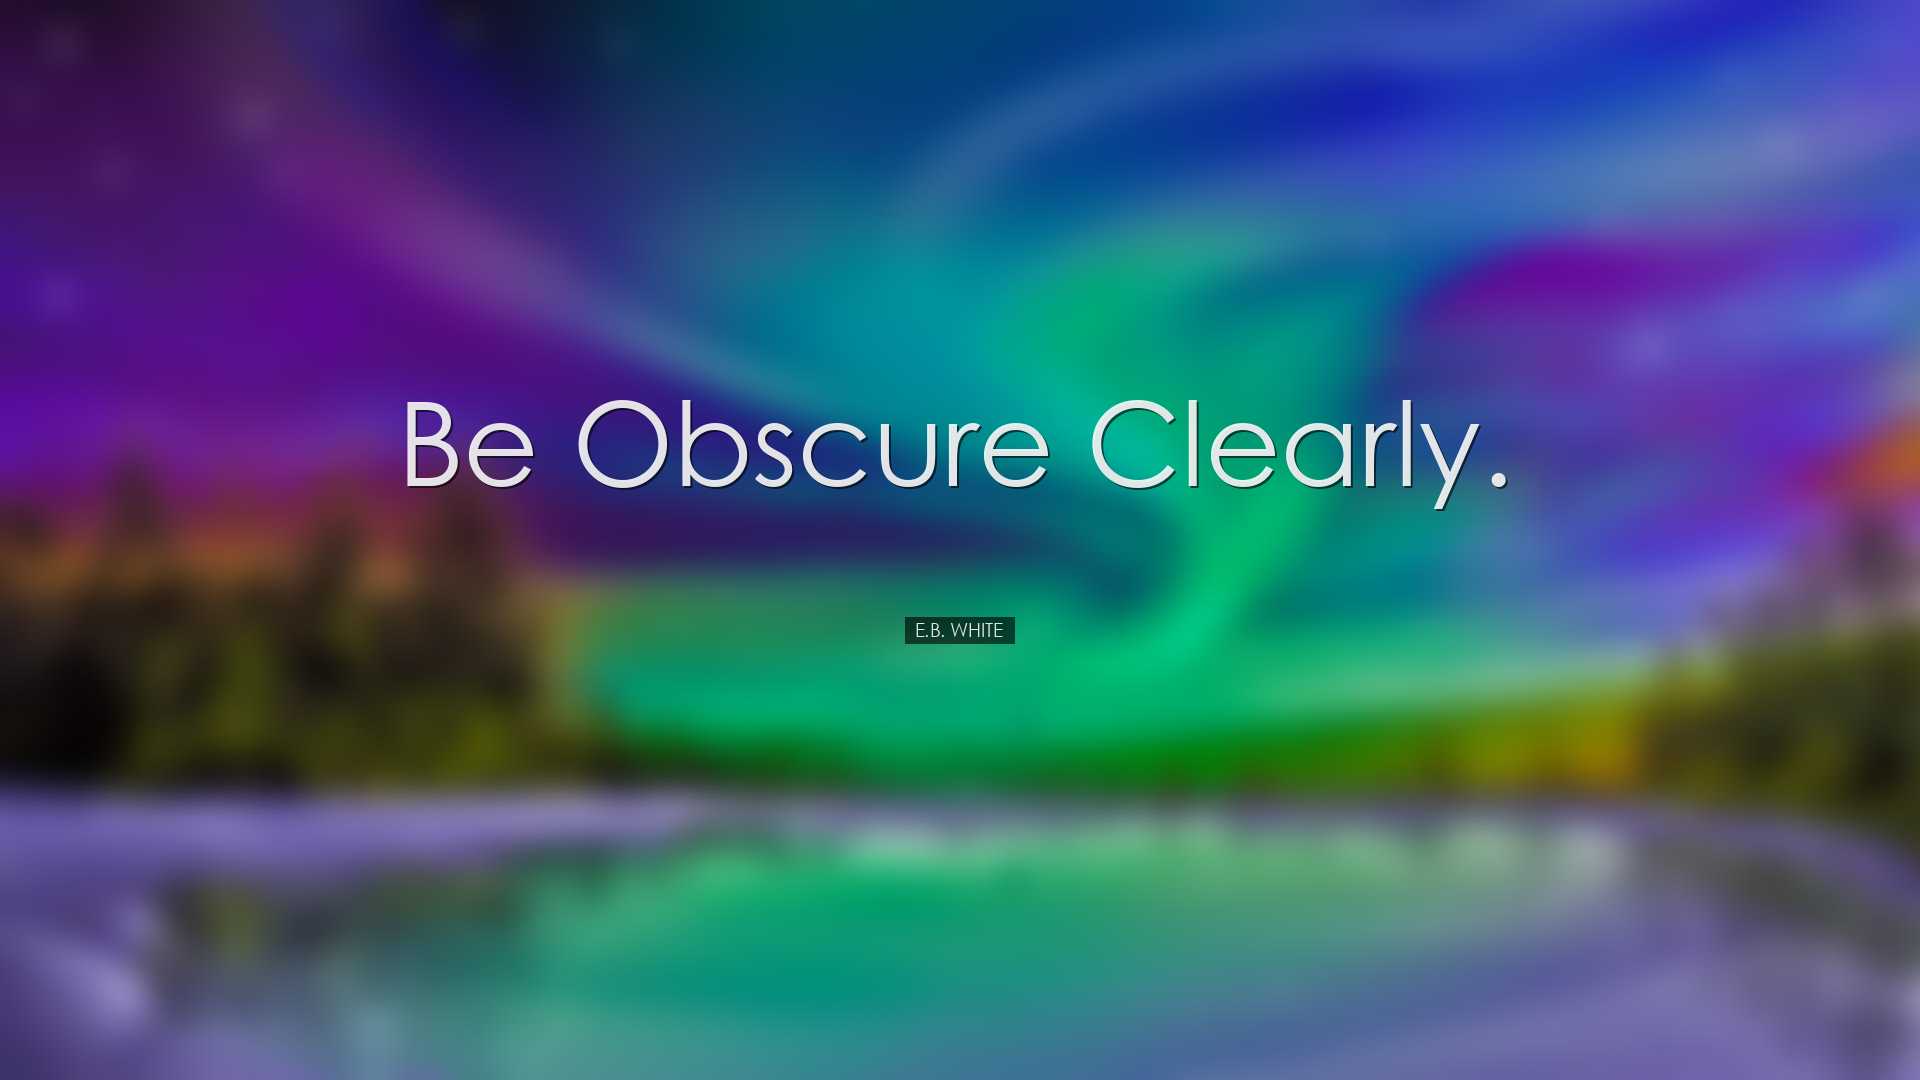 Be obscure clearly. - E.B. White